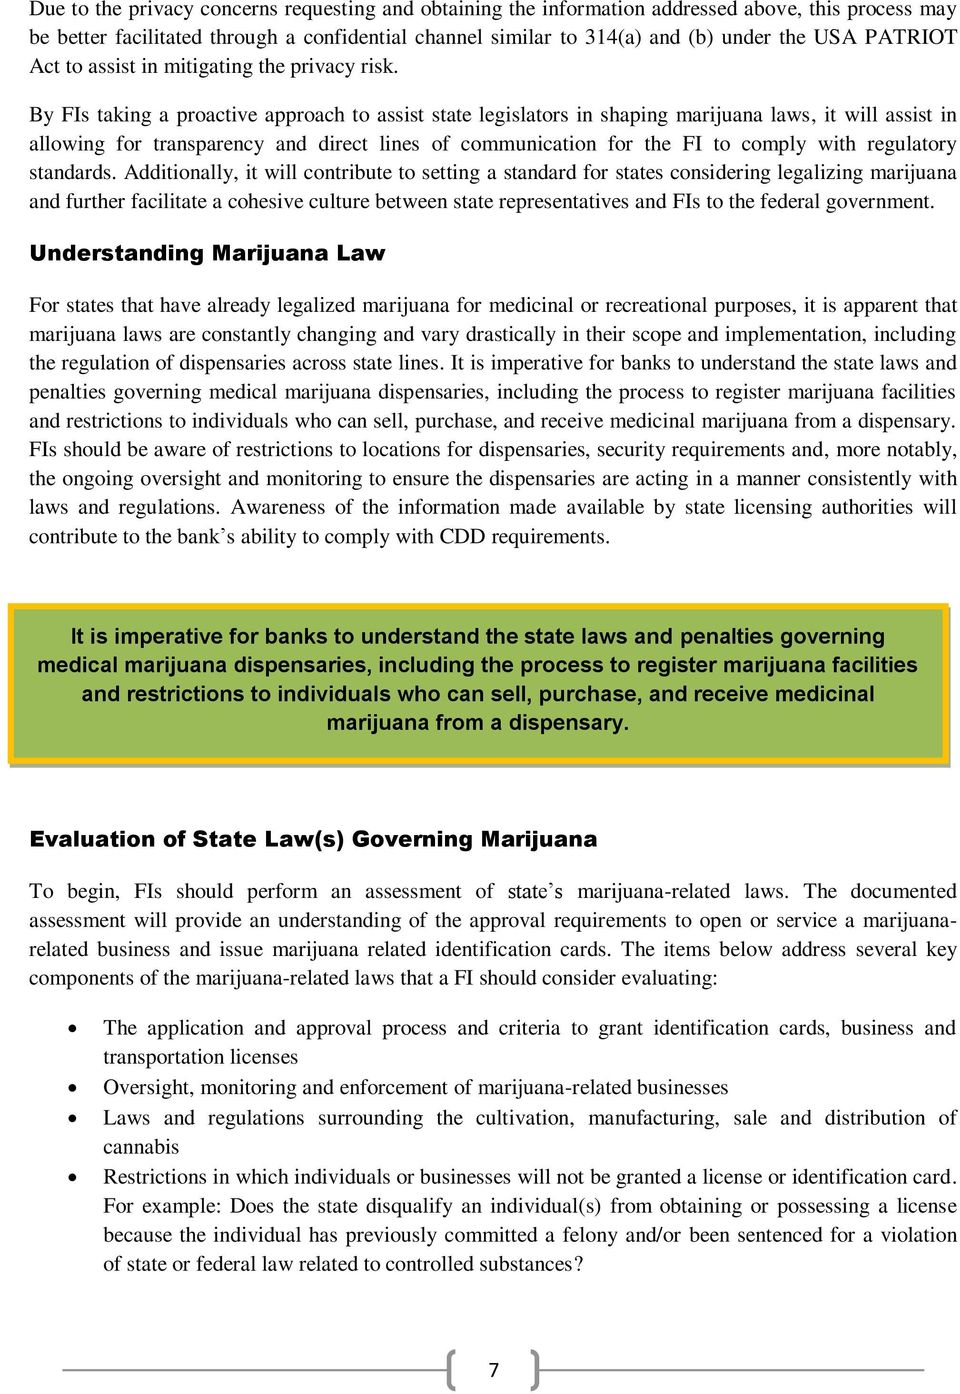 By FIs taking a proactive approach to assist state legislators in shaping marijuana laws, it will assist in allowing for transparency and direct lines of communication for the FI to comply with